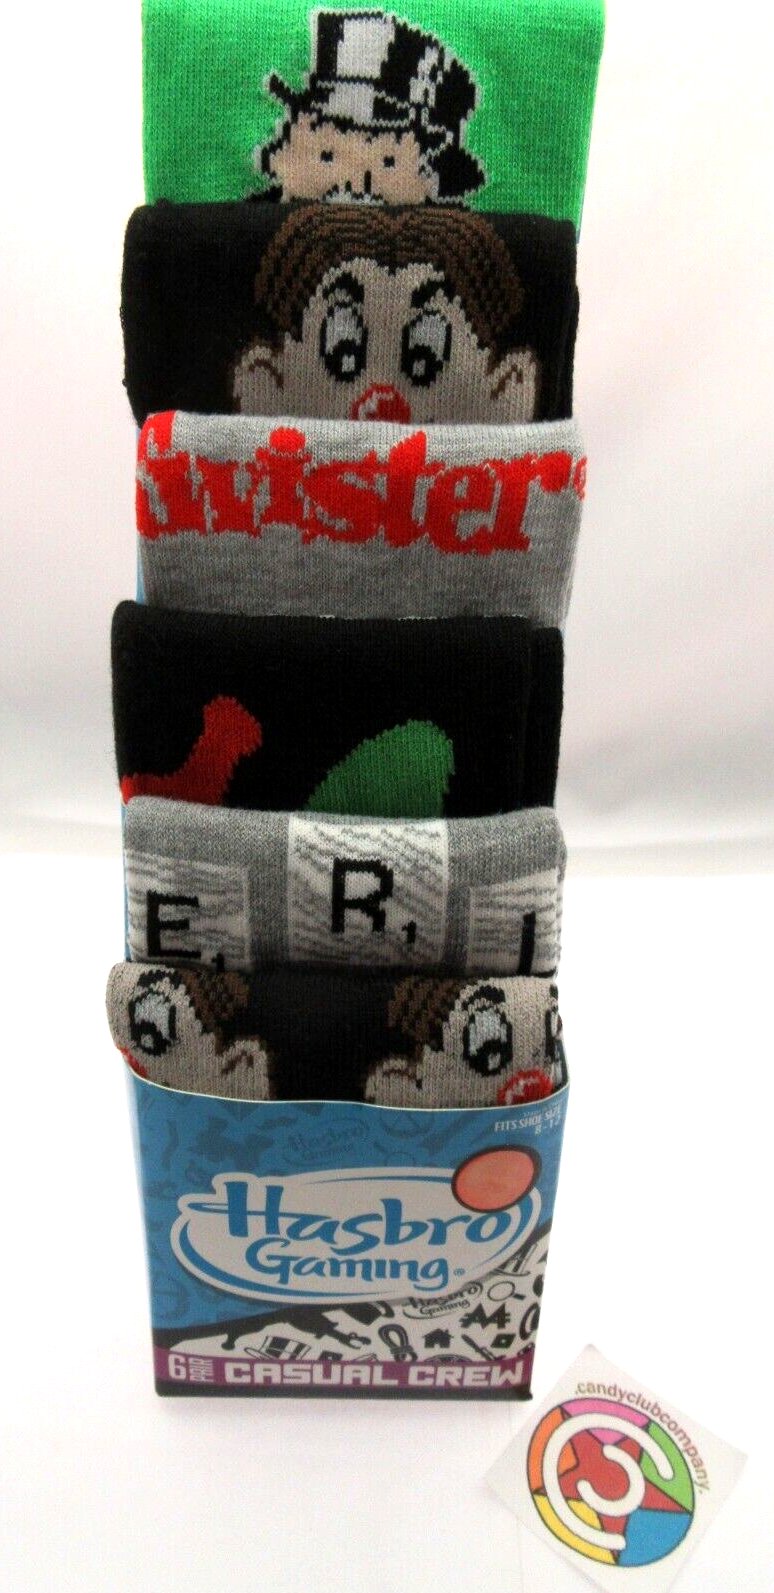 Hasbro Socks Fits Shoe Size 8-12 Casual Crew 6 Pair Monopoly Twister Sorry Games